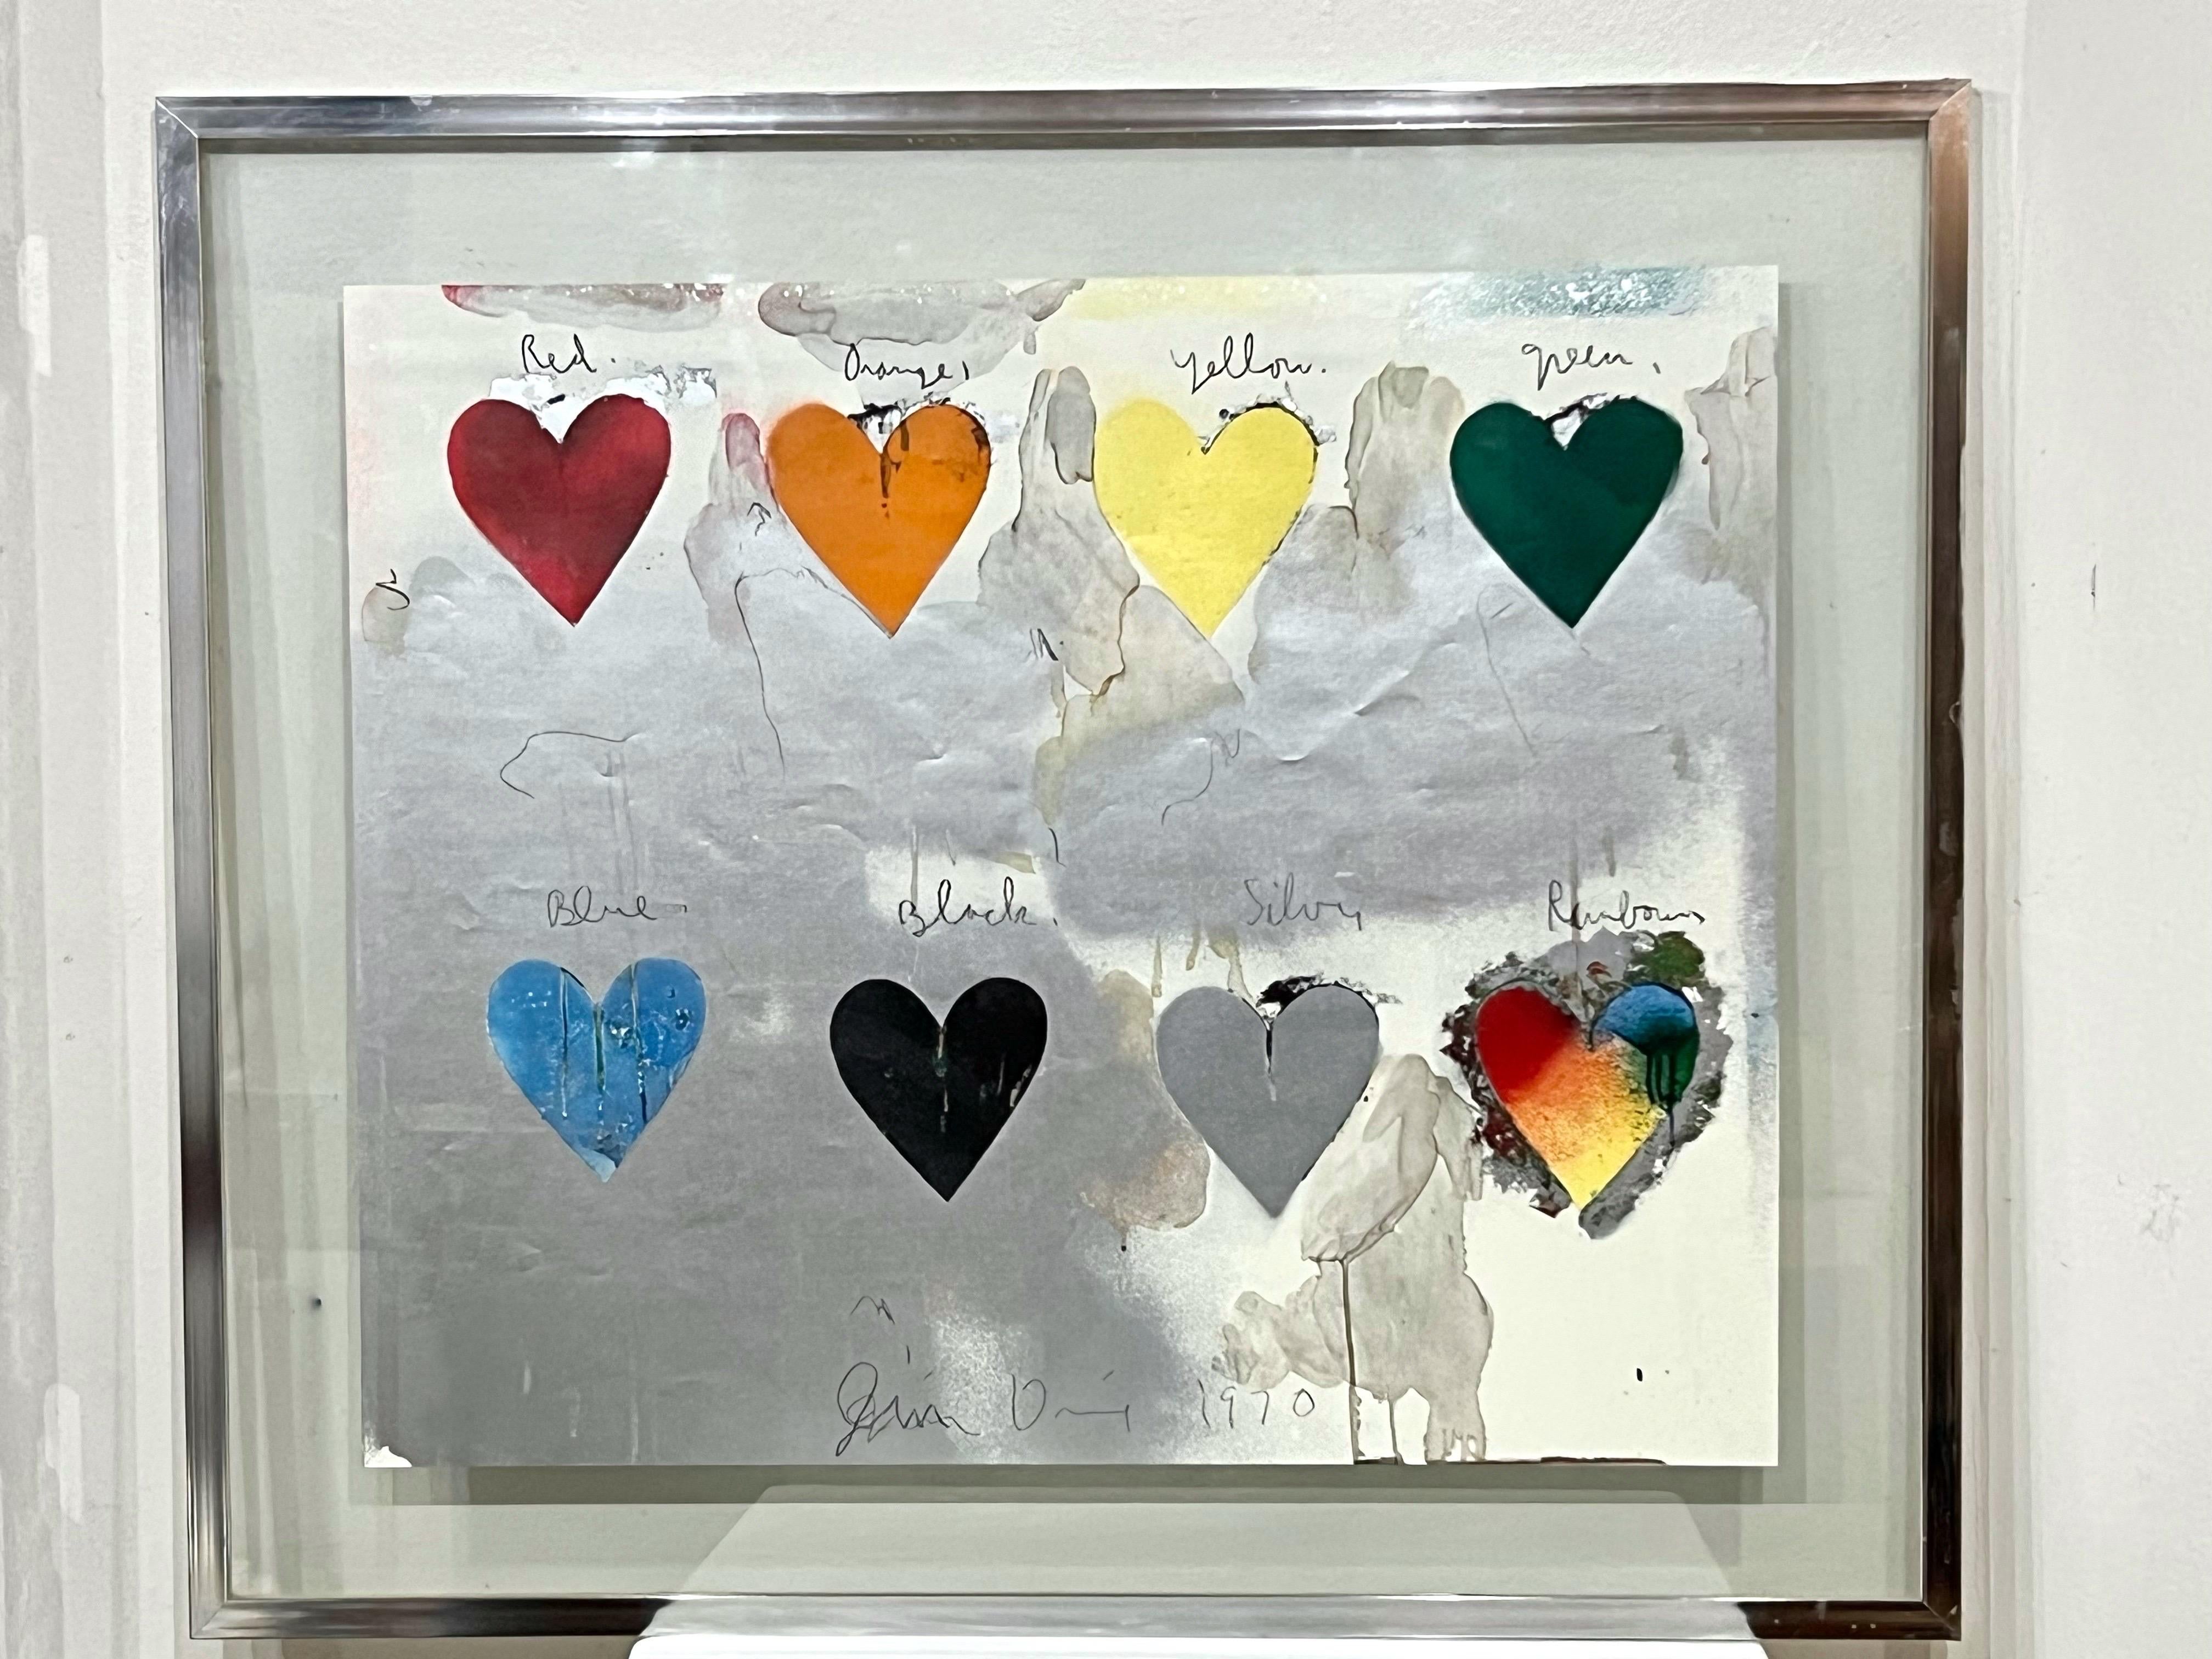 A framed 8 Hearts lithograph by Jim Dine. 